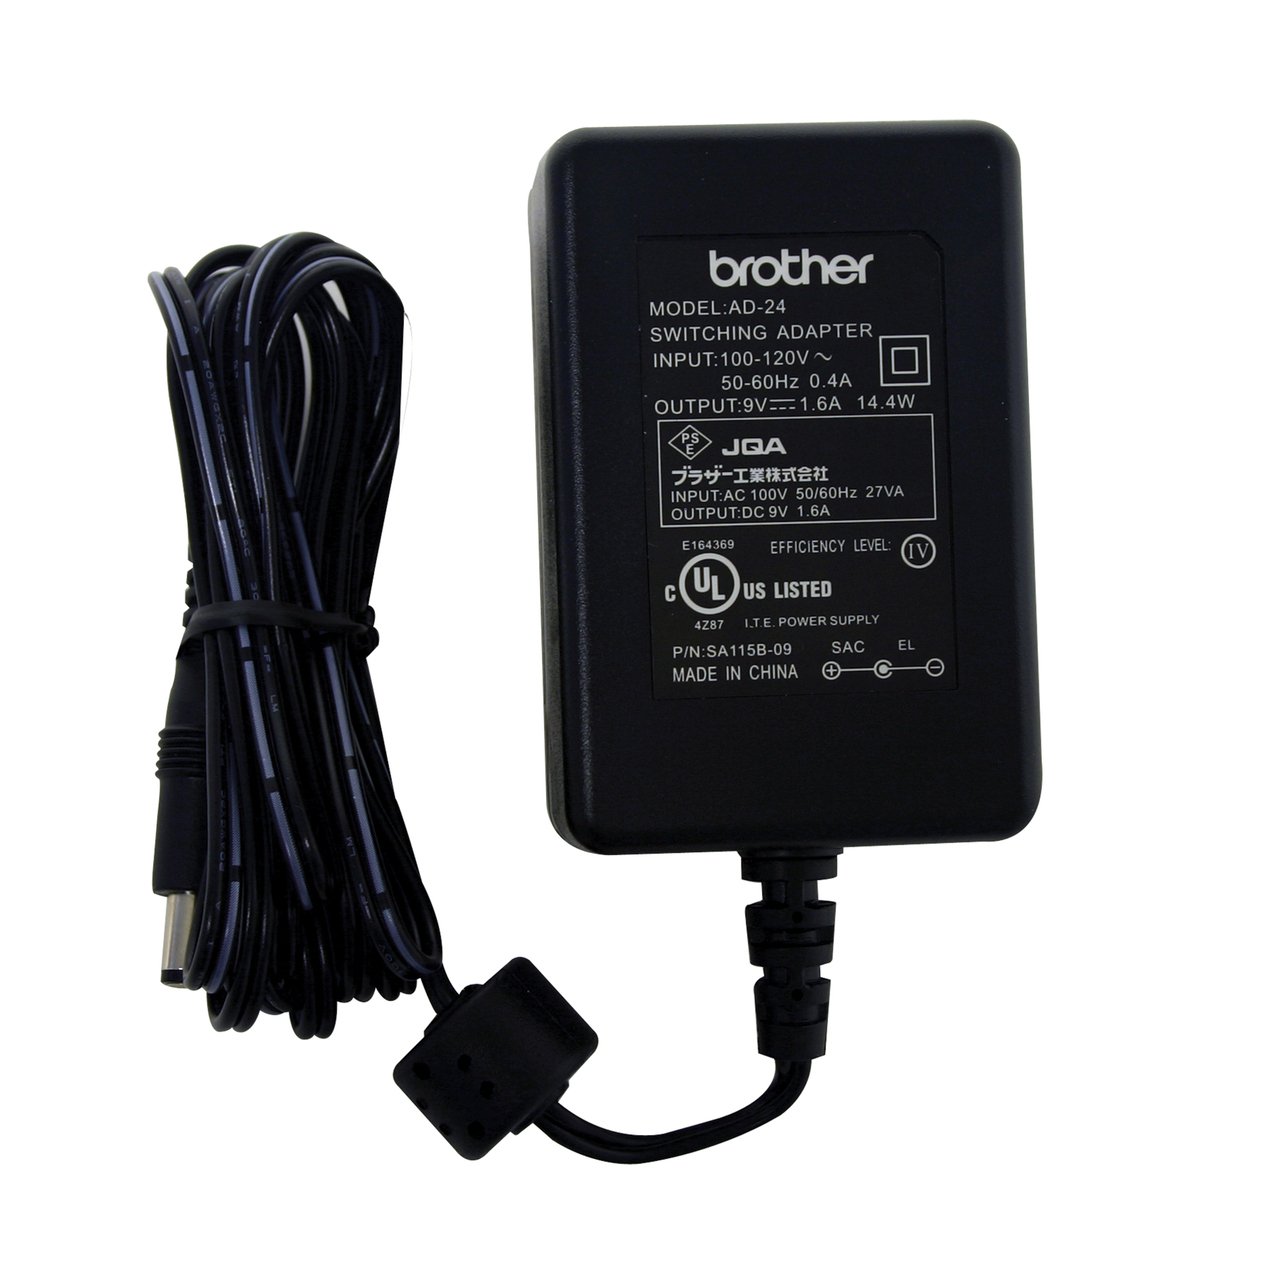 New 9V 1.6A Brother AD-24ES Black Power Adaptor & Inverter Power Adapters